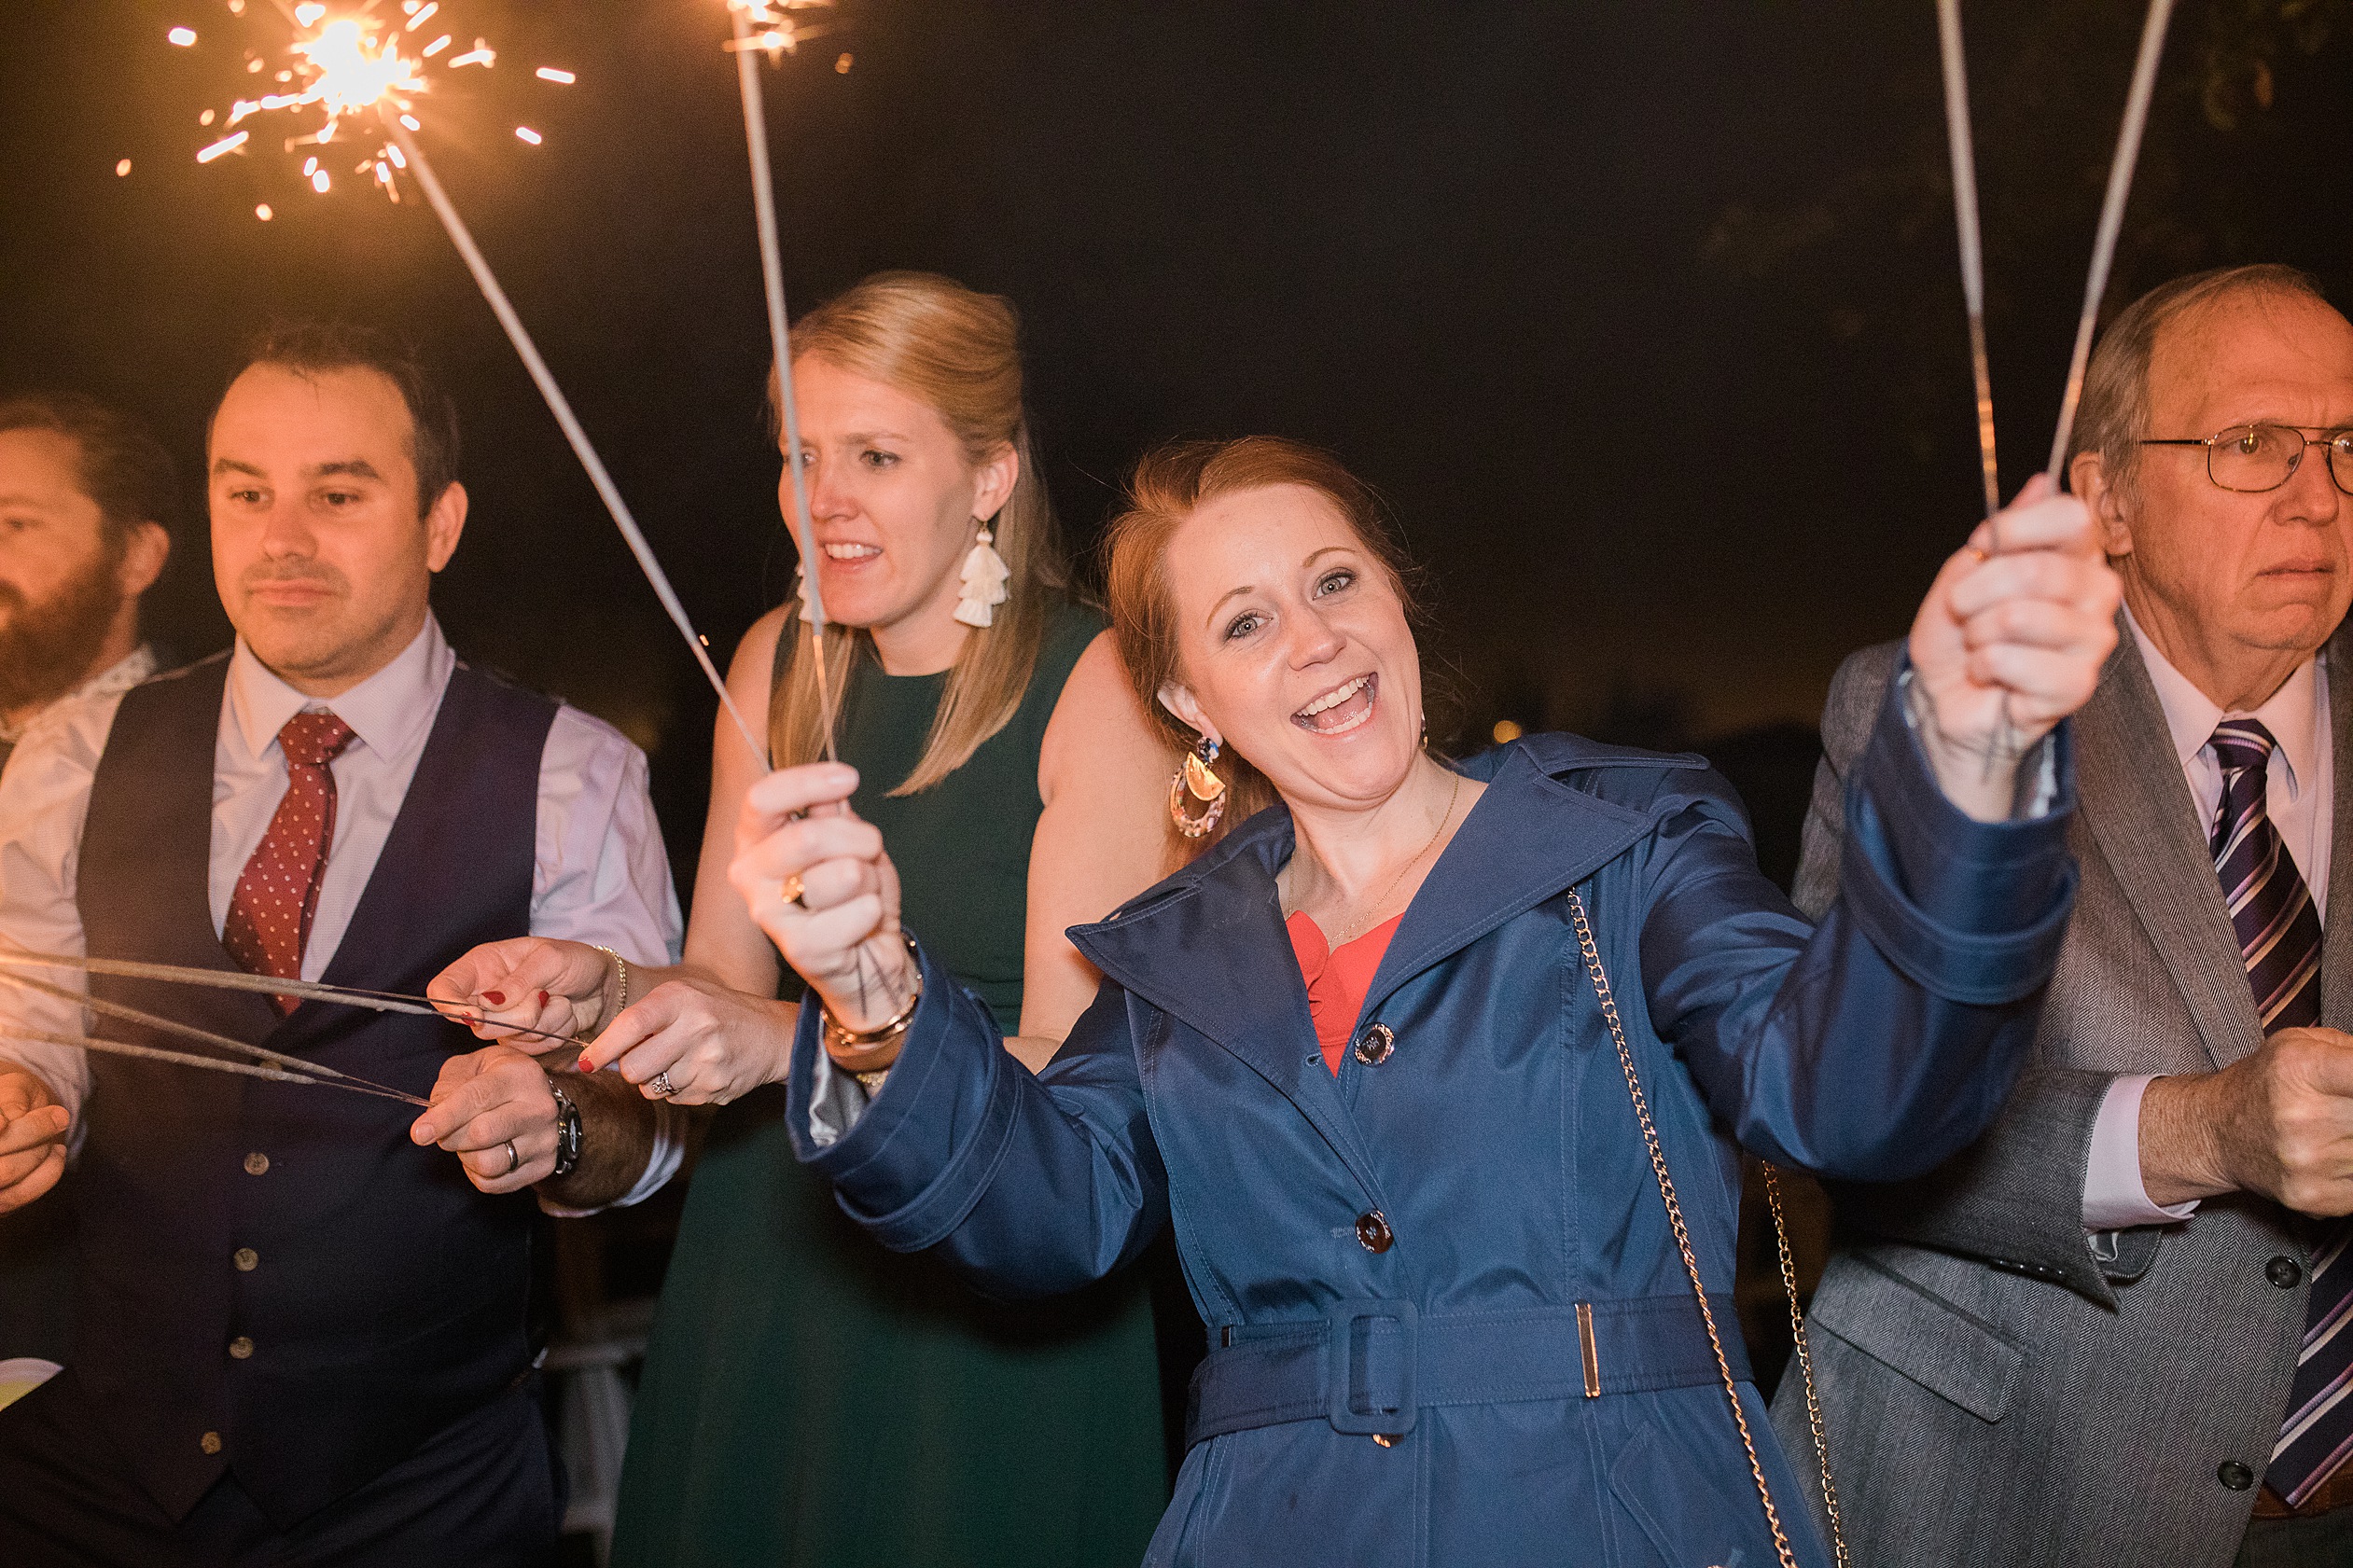 Fun with the Sparklers at end of reception